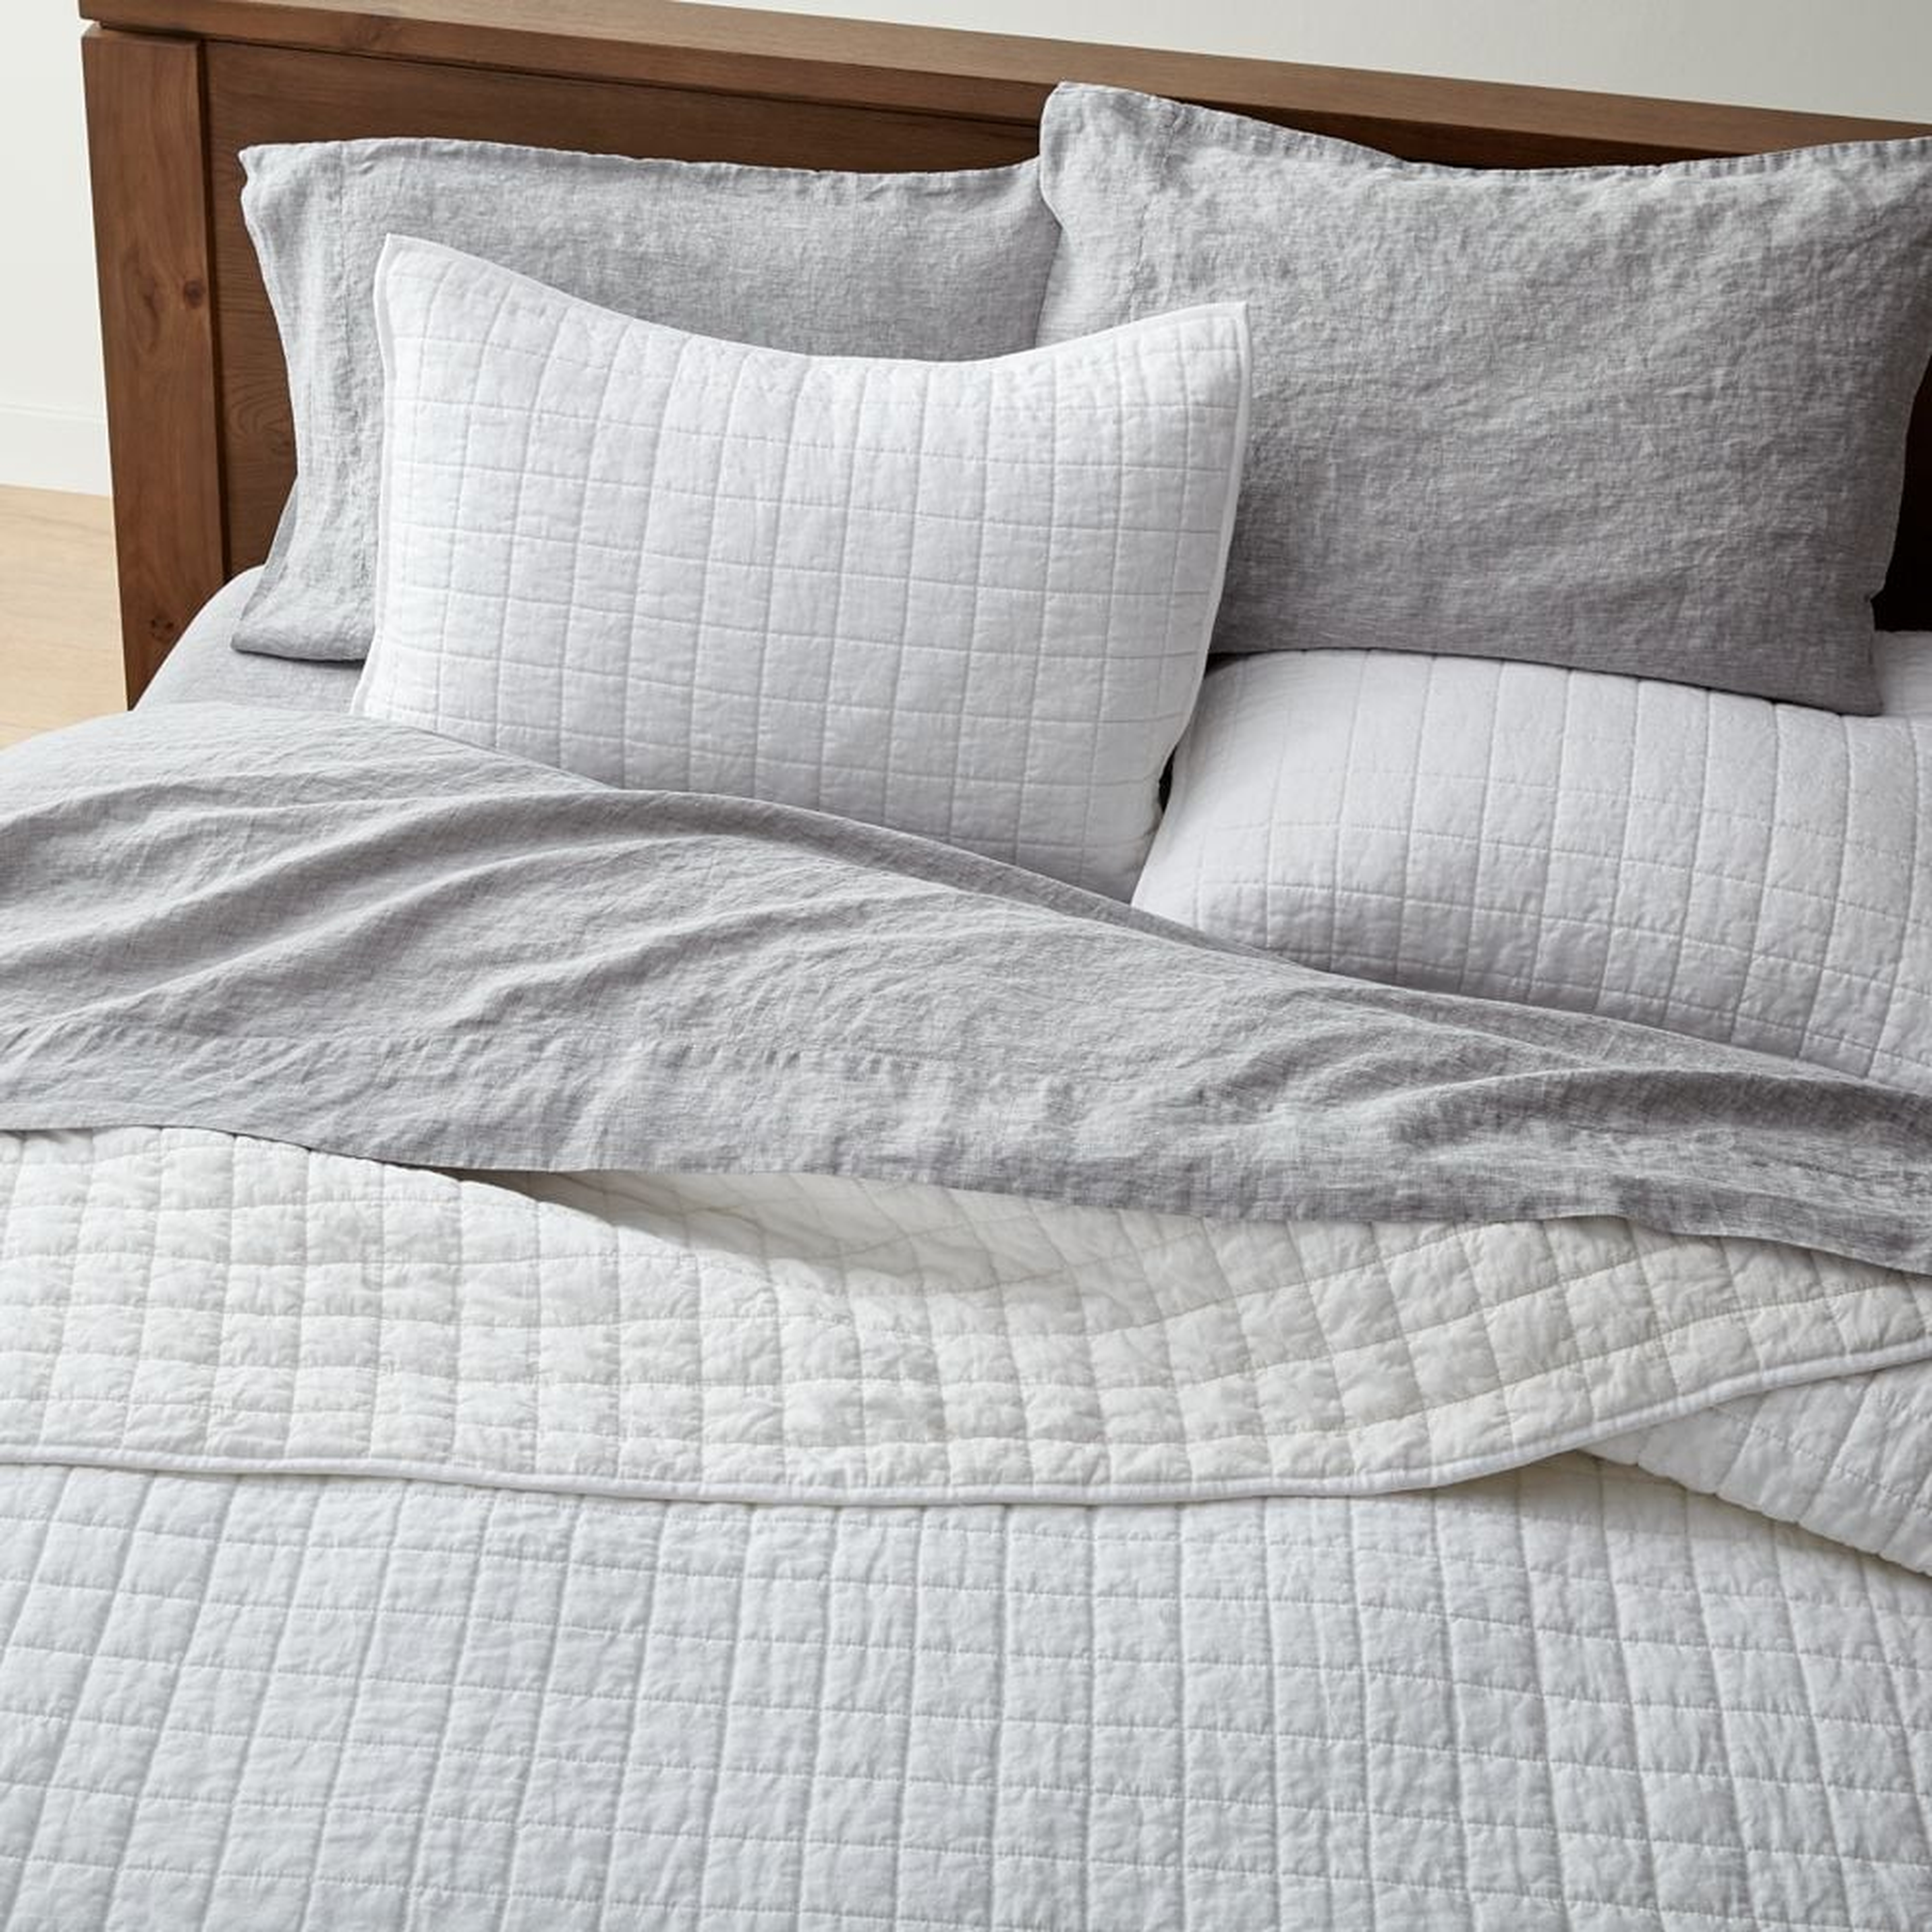 Warm White Belgian Flax Linen Quilt King - Crate and Barrel